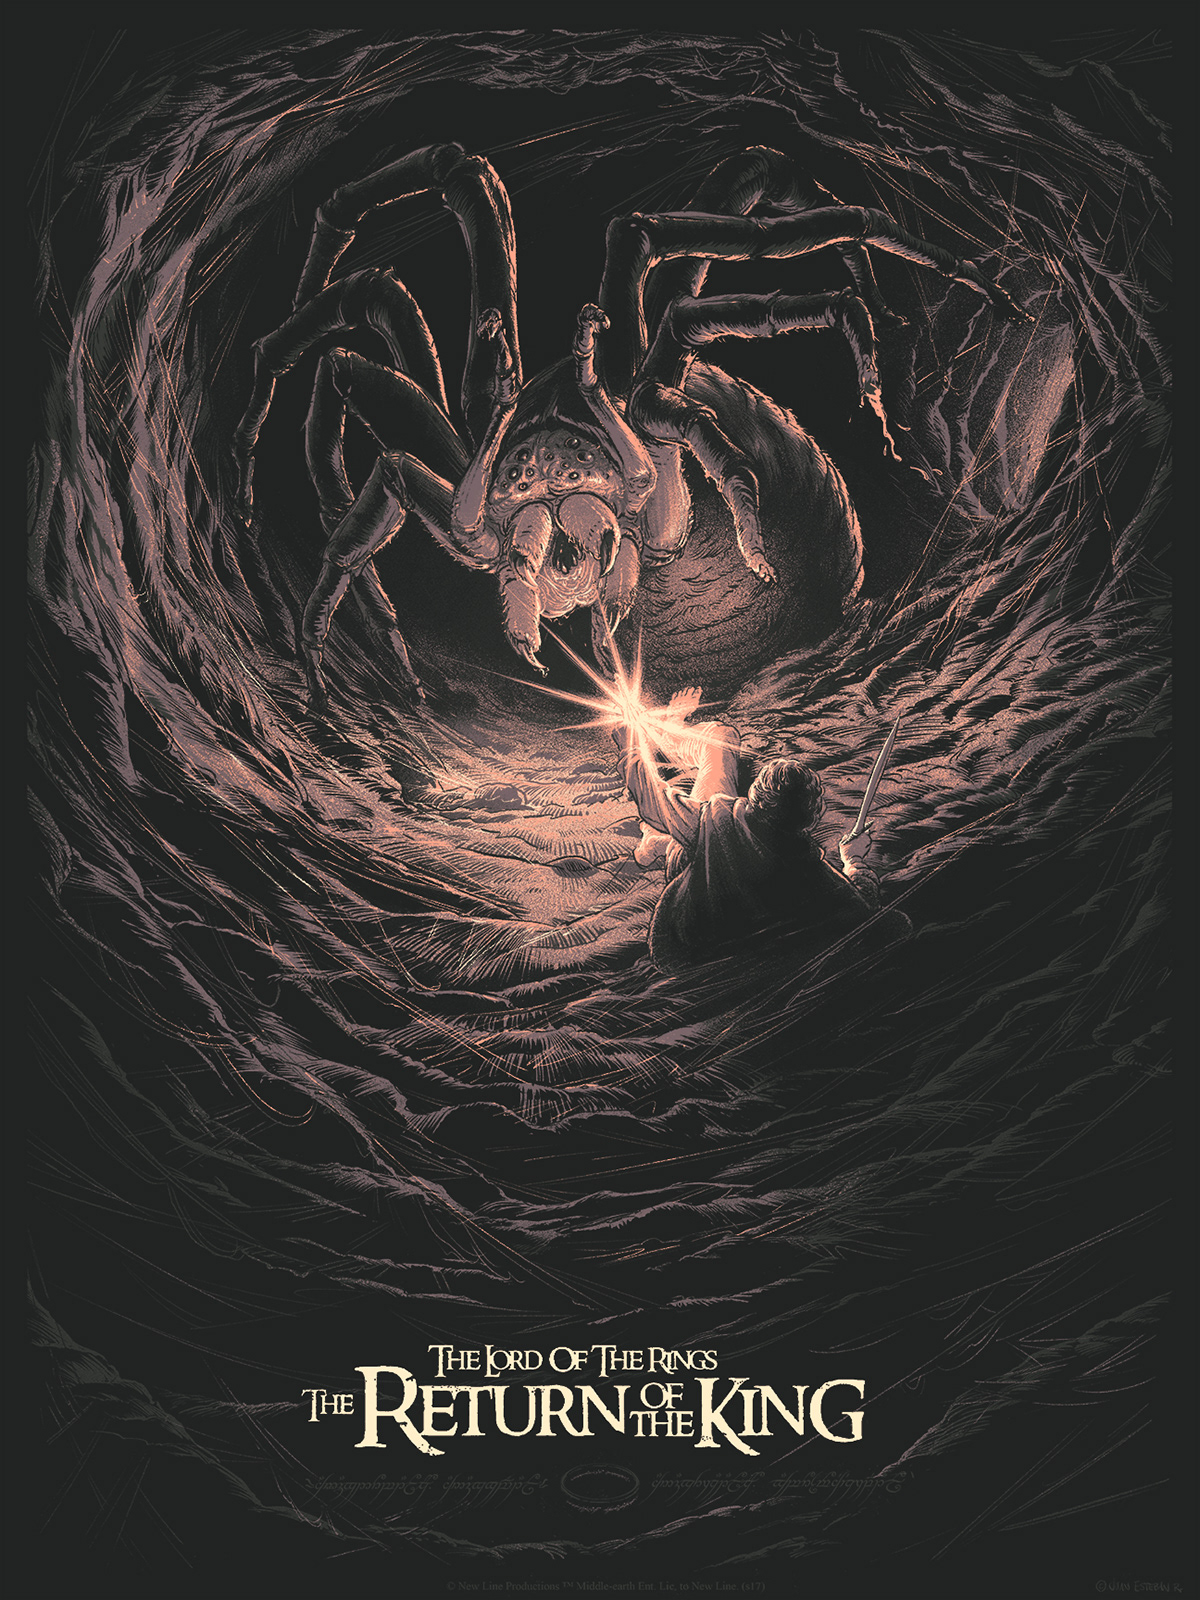 The lord of the rings return of the king Peter Jackson poster alternative movie poster mondo poster bottleneck gallery shellob